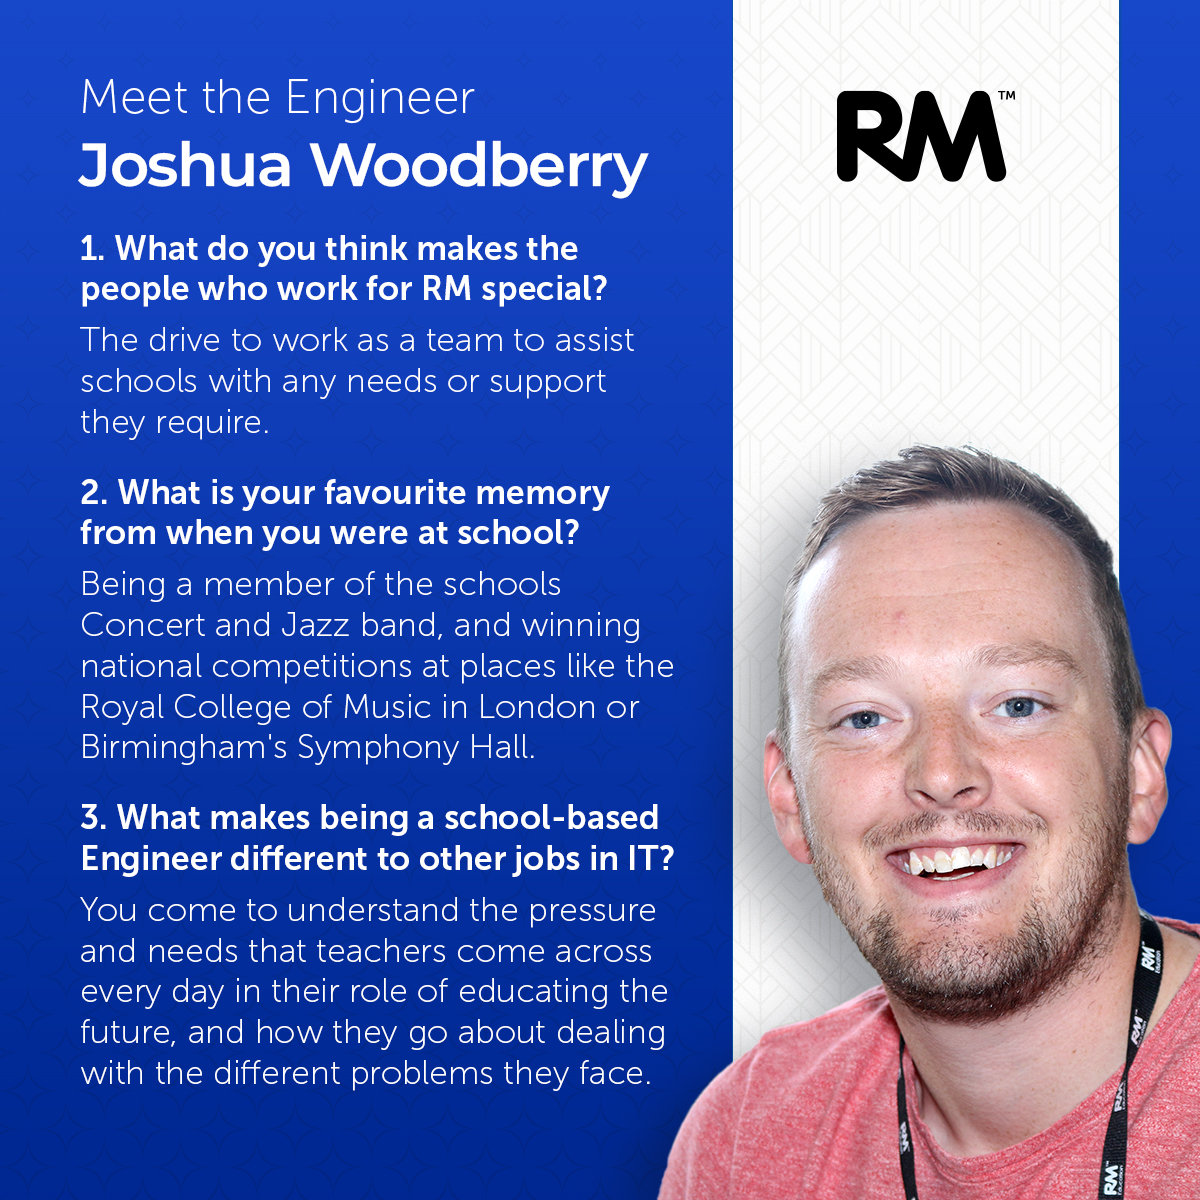 For this month’s ‘Meet the Engineer’, we are profiling Joshua Woodberry, who joined RM on an apprenticeship at just 17 years old and has now worked in the RM Dudley team for nearly 12 years. Get to know Joshua and his work through his answers below: